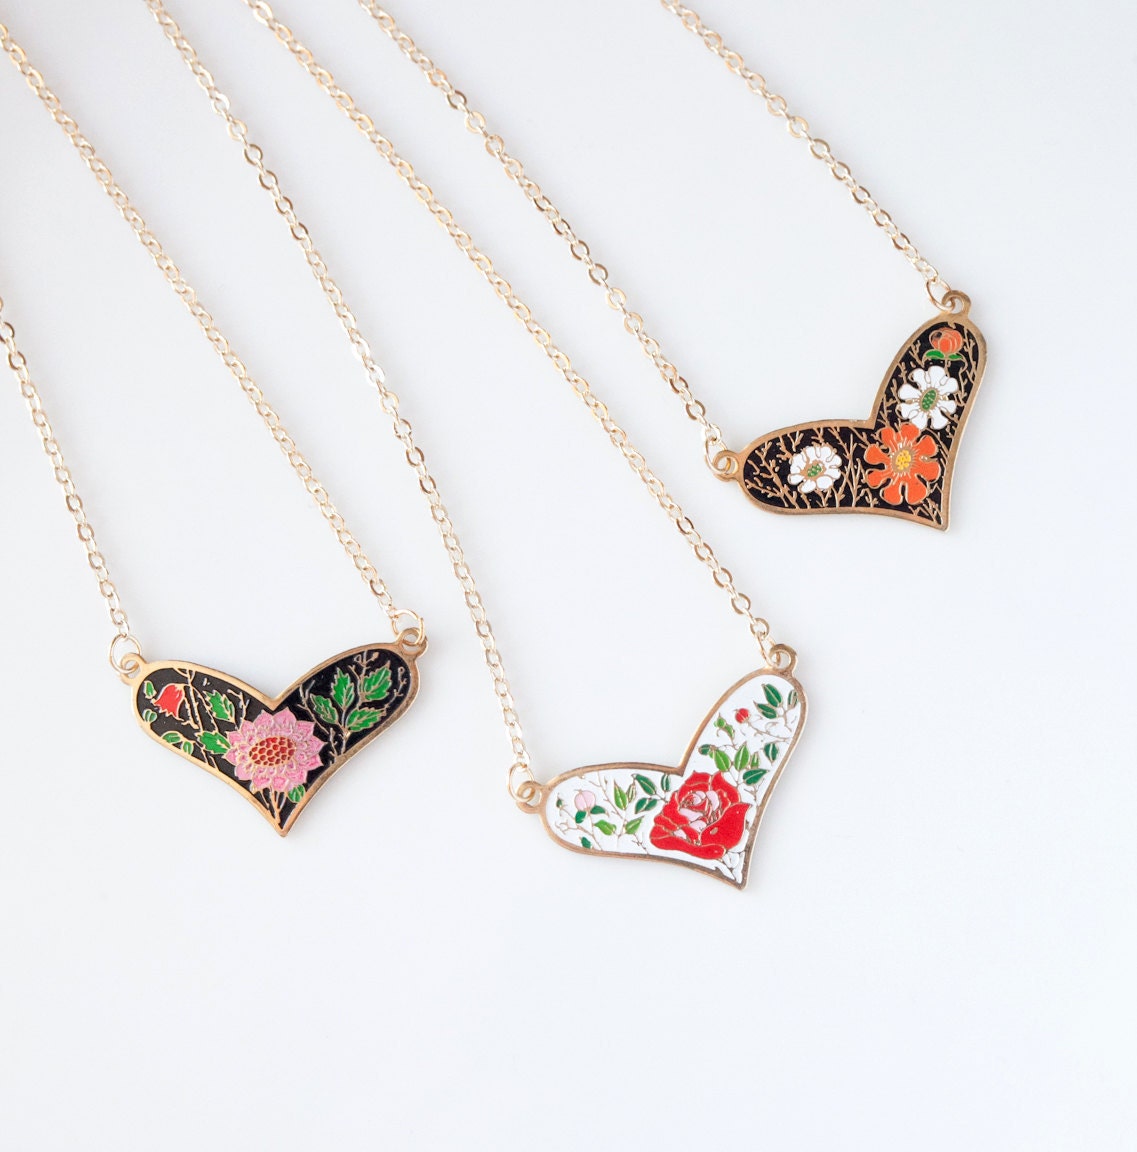 Floral Heart Necklace - Pink Mum, Red Rose or Orange Daisy - Pick one - saylorrose